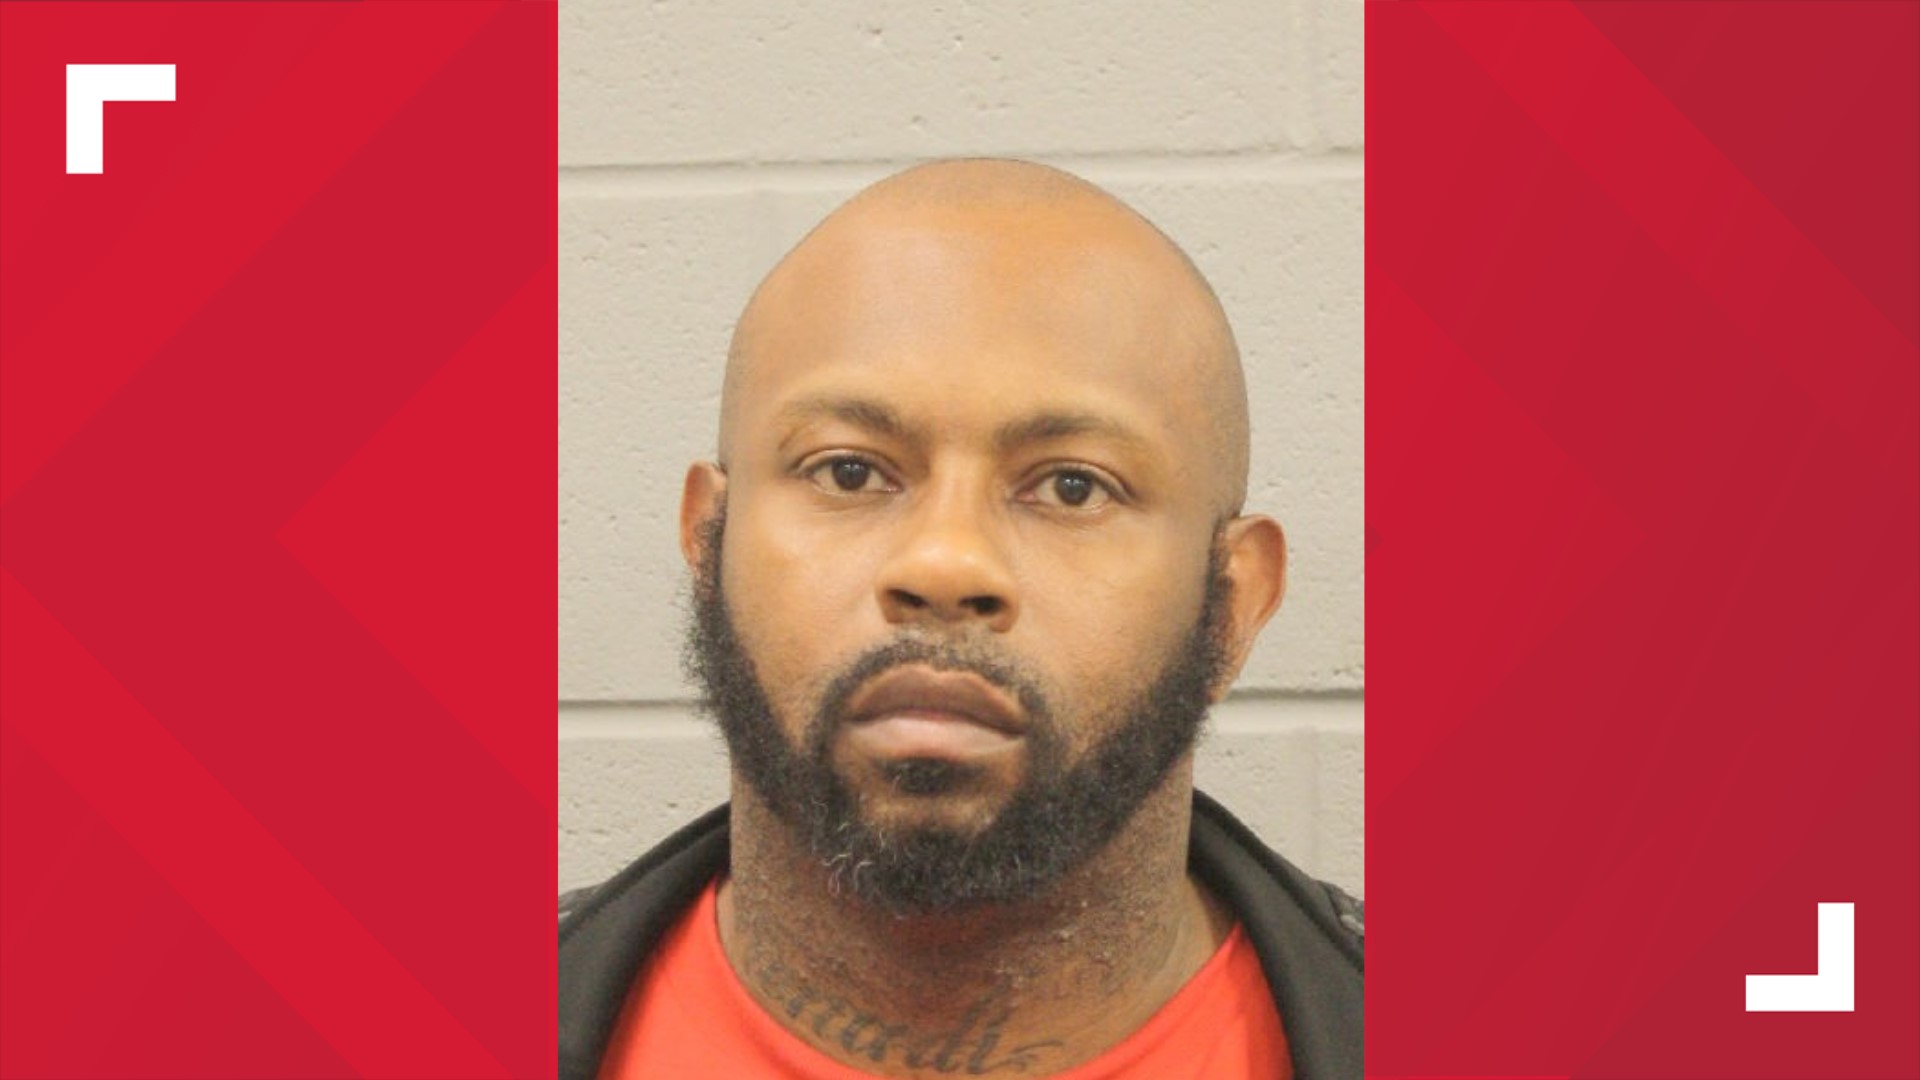 Kendrick Akins is charged with murder in the death of Dominic Jefferson. He is also accused of opening fire on a good Samaritan who tried to help the victim.